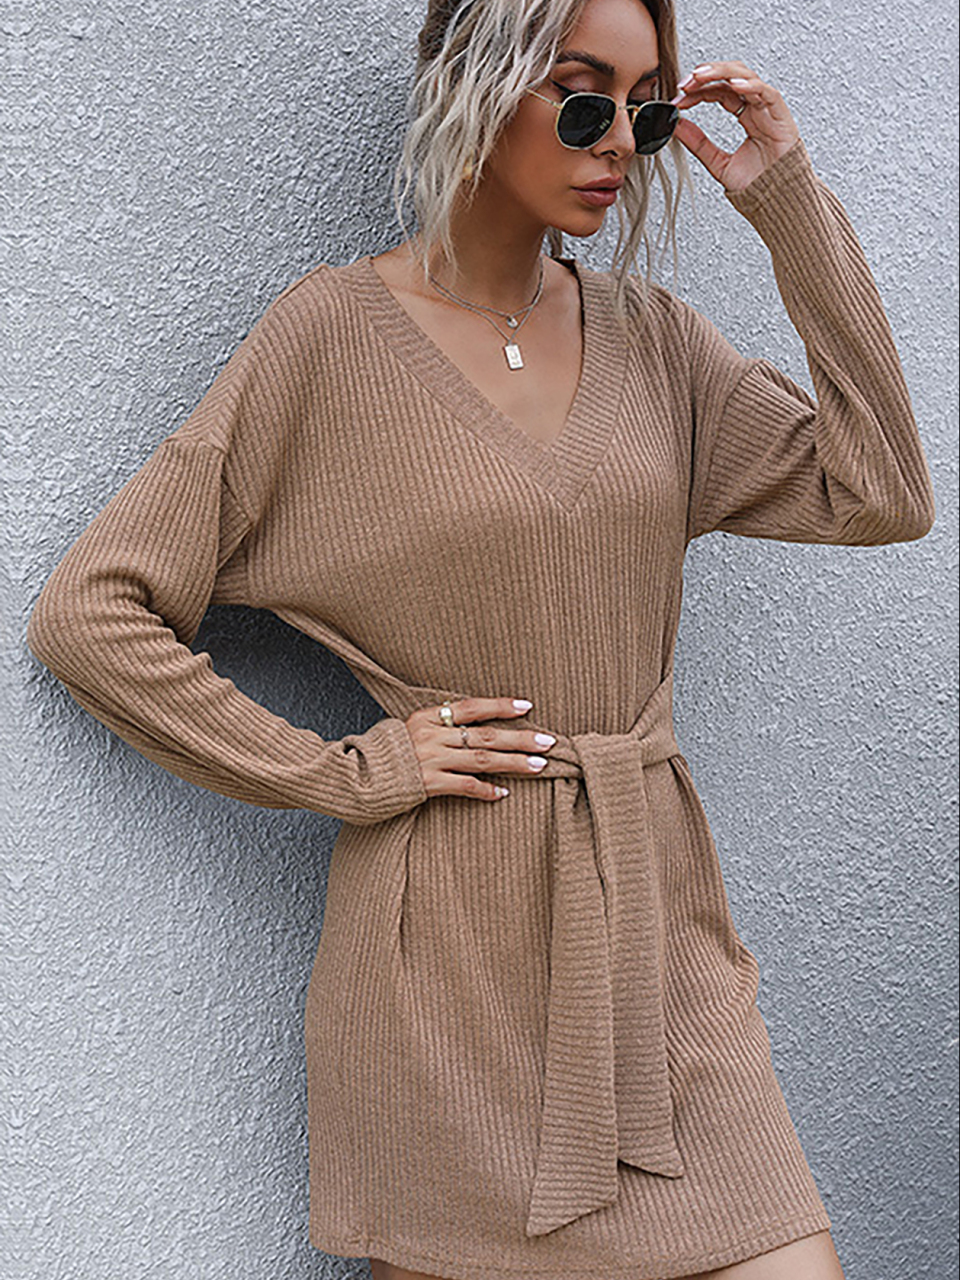 Ladies Long Sleeve Solid Color V-Neck Knit Sweater Dress